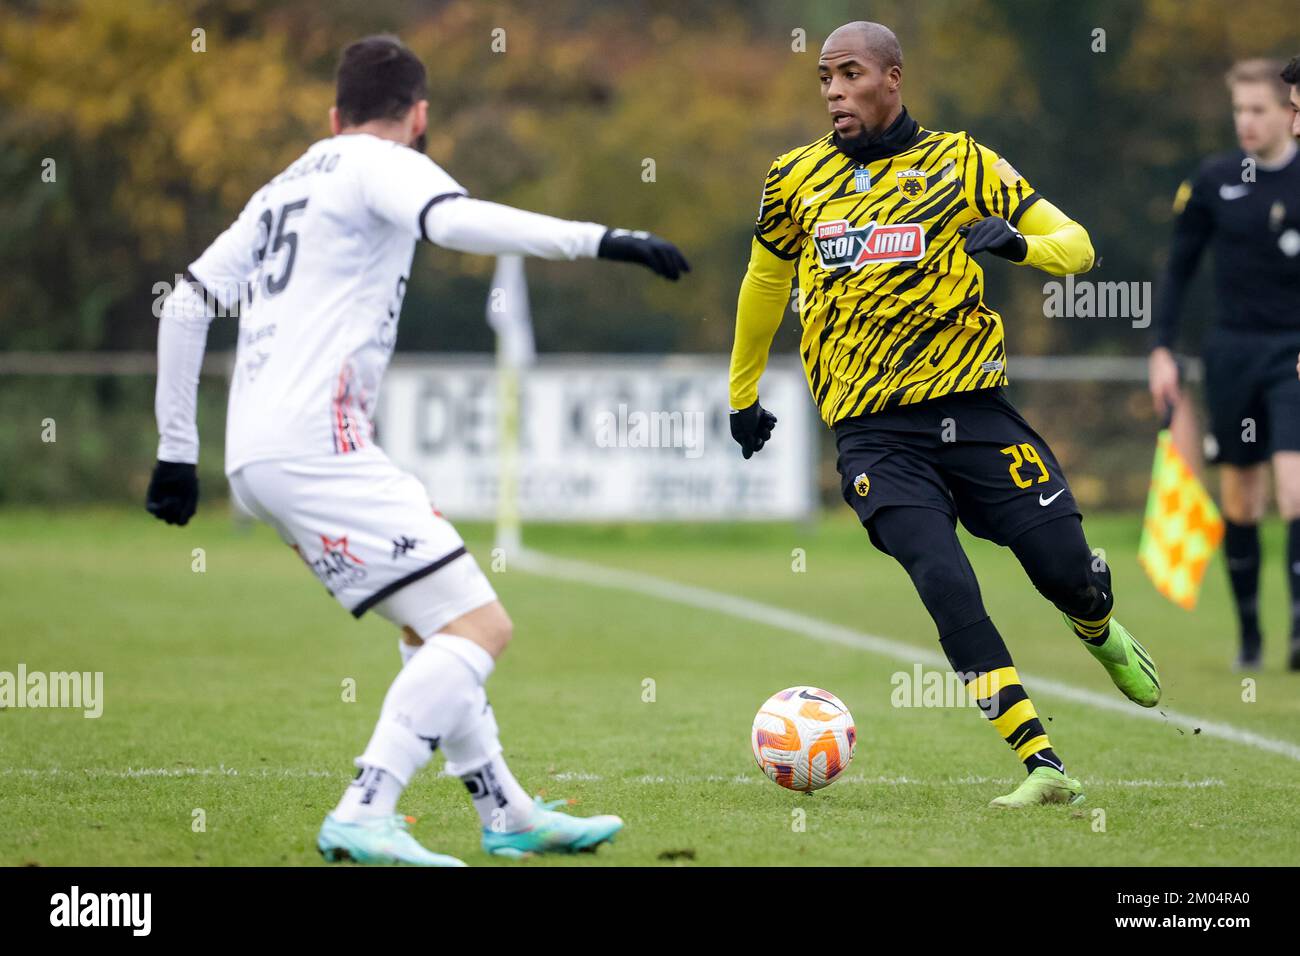 BURGH-HAAMSTEDE, NETHERLANDS - DECEMBER 4: Djibril Sidibe of AEK Athens during the Friendly match between AEK Athens and RFC Seraing at Sportpark van Zuijen on December 4, 2022 in Burgh-Haamstede, Netherlands (Photo by Broer van den Boom/Orange Pictures) Stock Photo